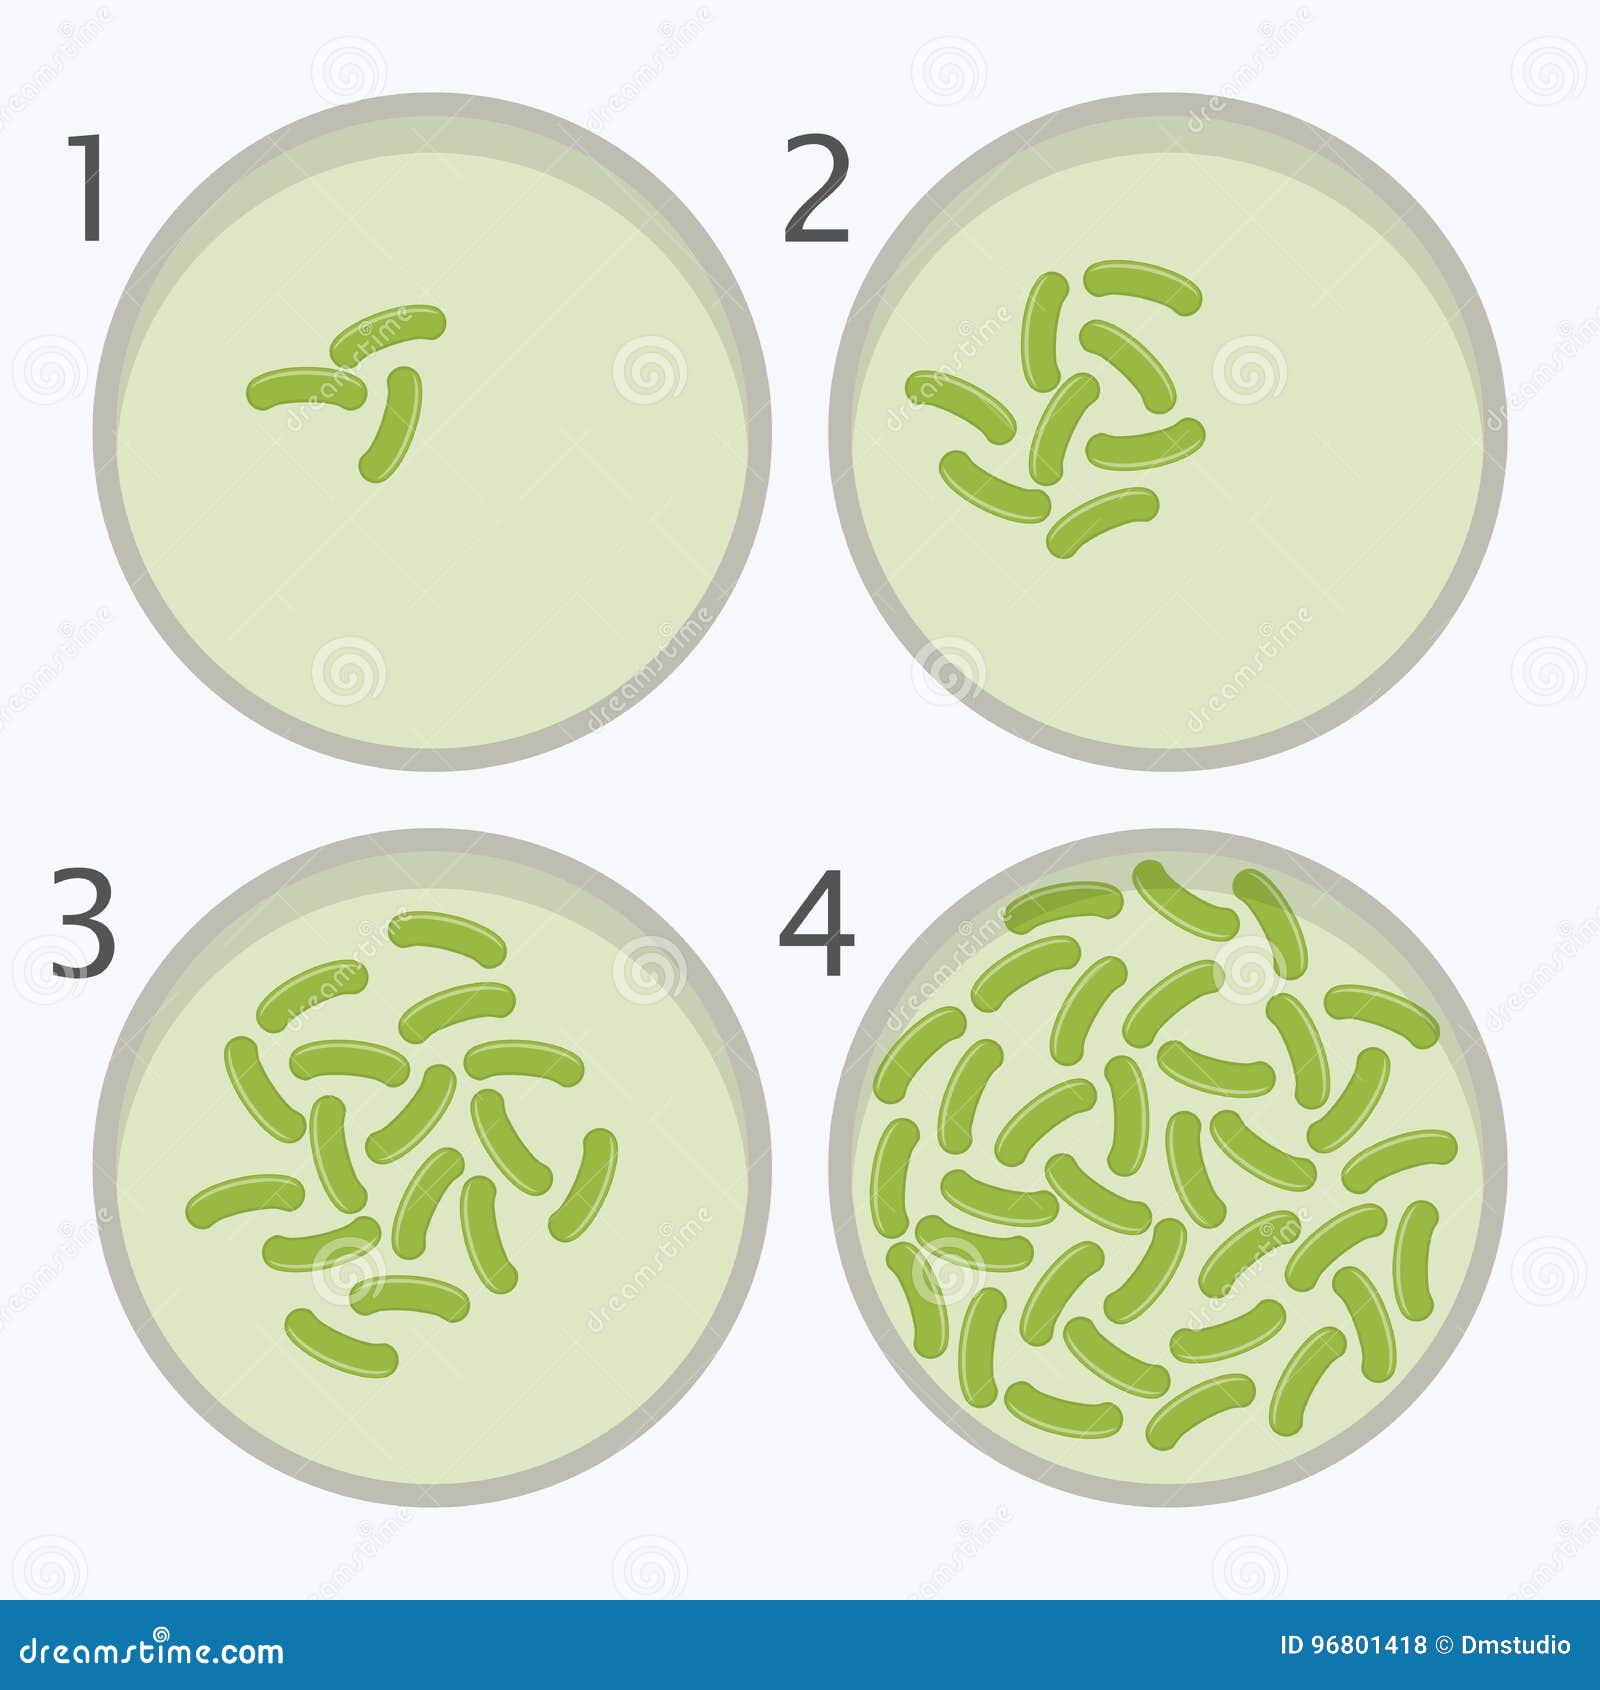 bacteria growth stages. bacterium in petri dishes. 